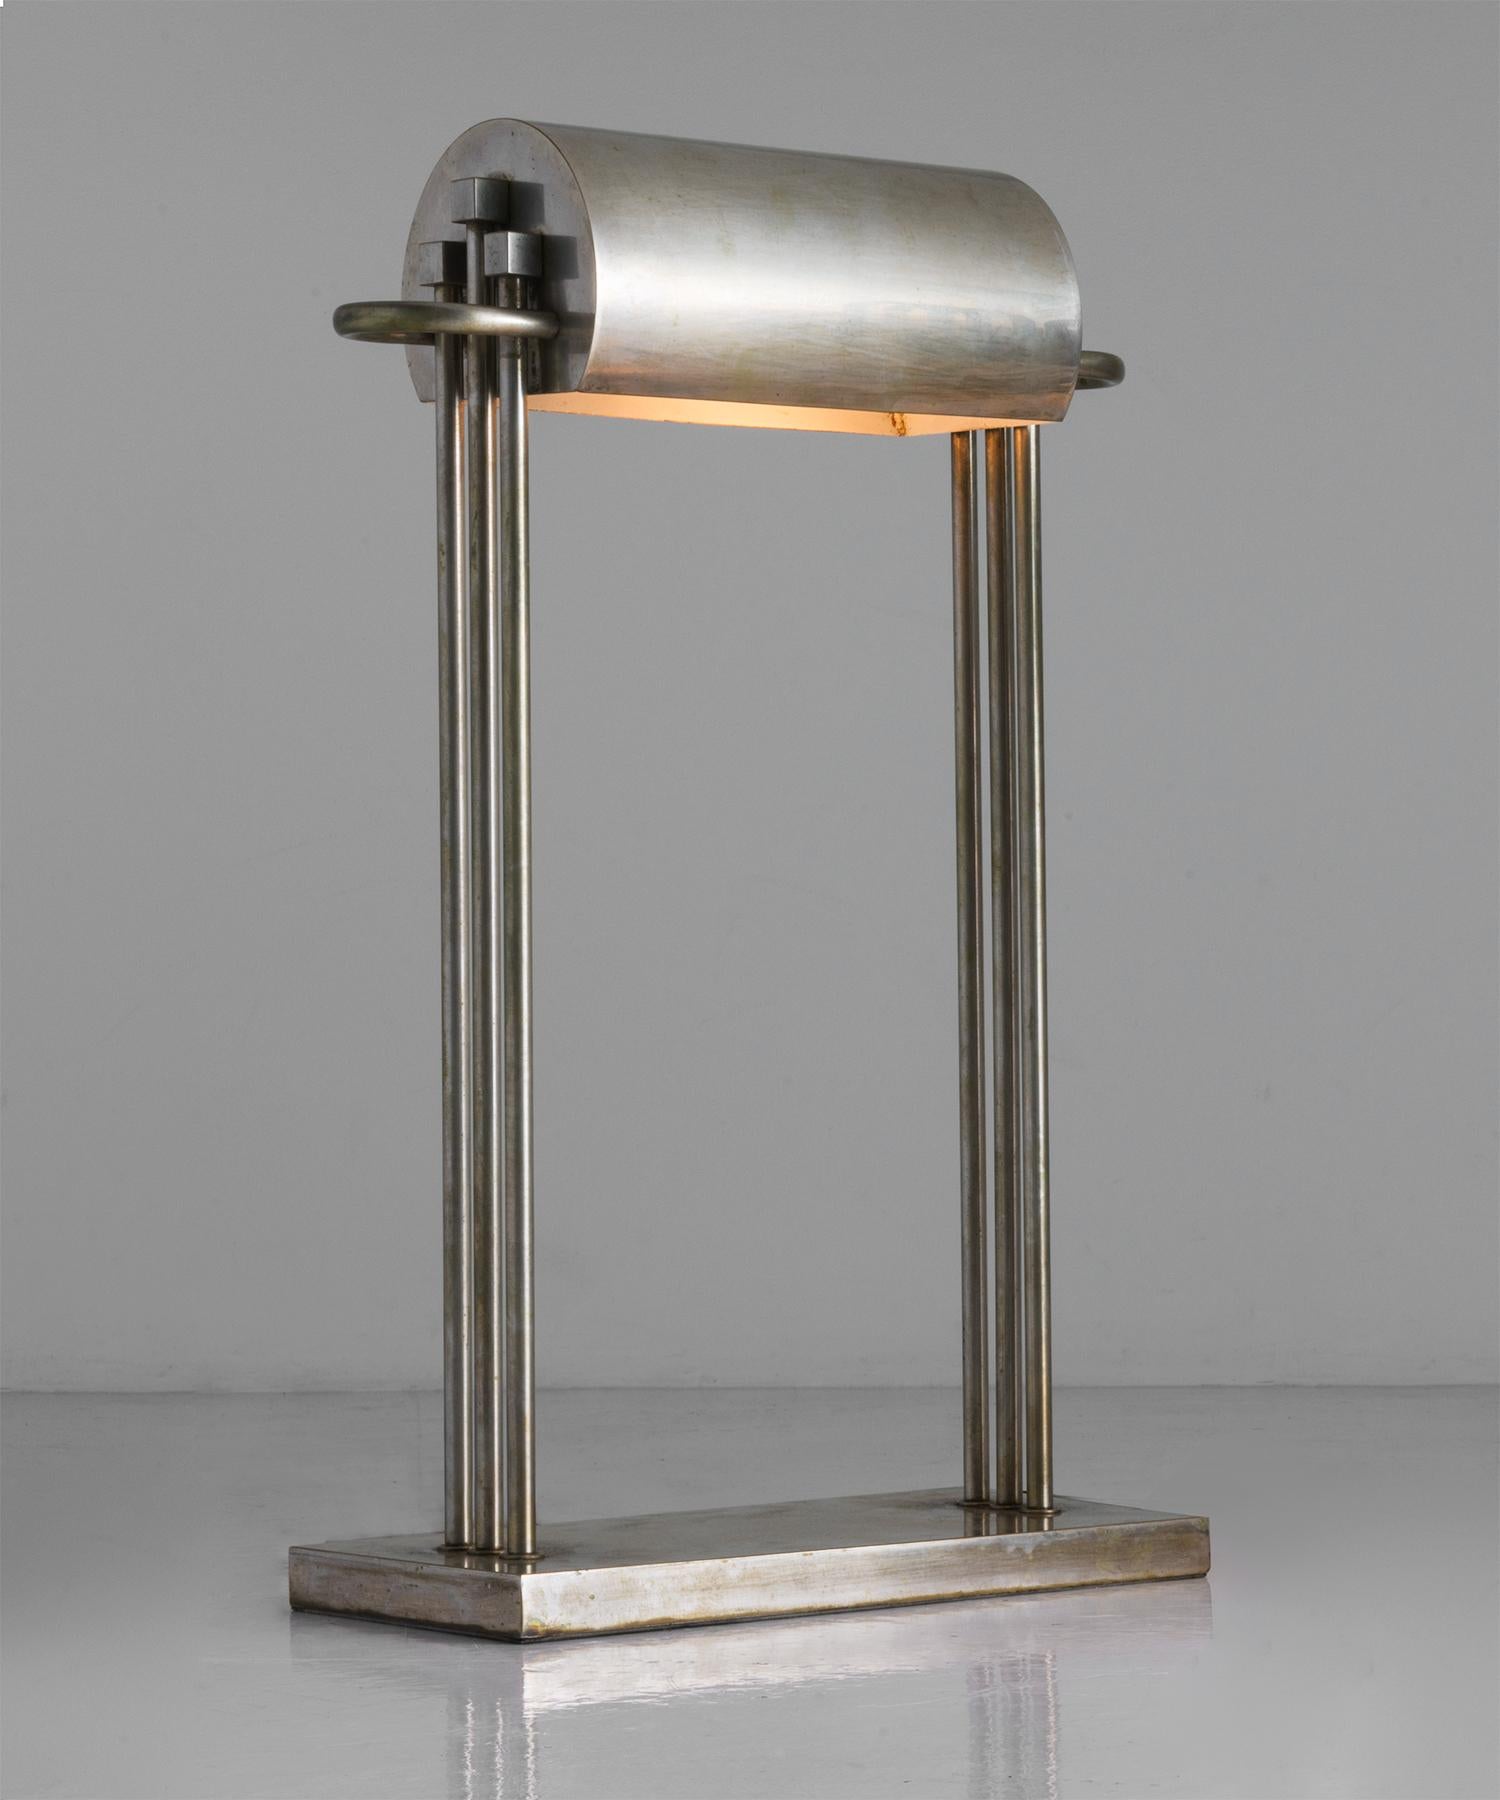 Marcel Breuer Desk Lamp, Germany, circa 1925

Created for the International Exposition of Modern Industrial and Decorative Arts in Paris. Brass-plated nickel and stamped “Exposition Paris 1925.”